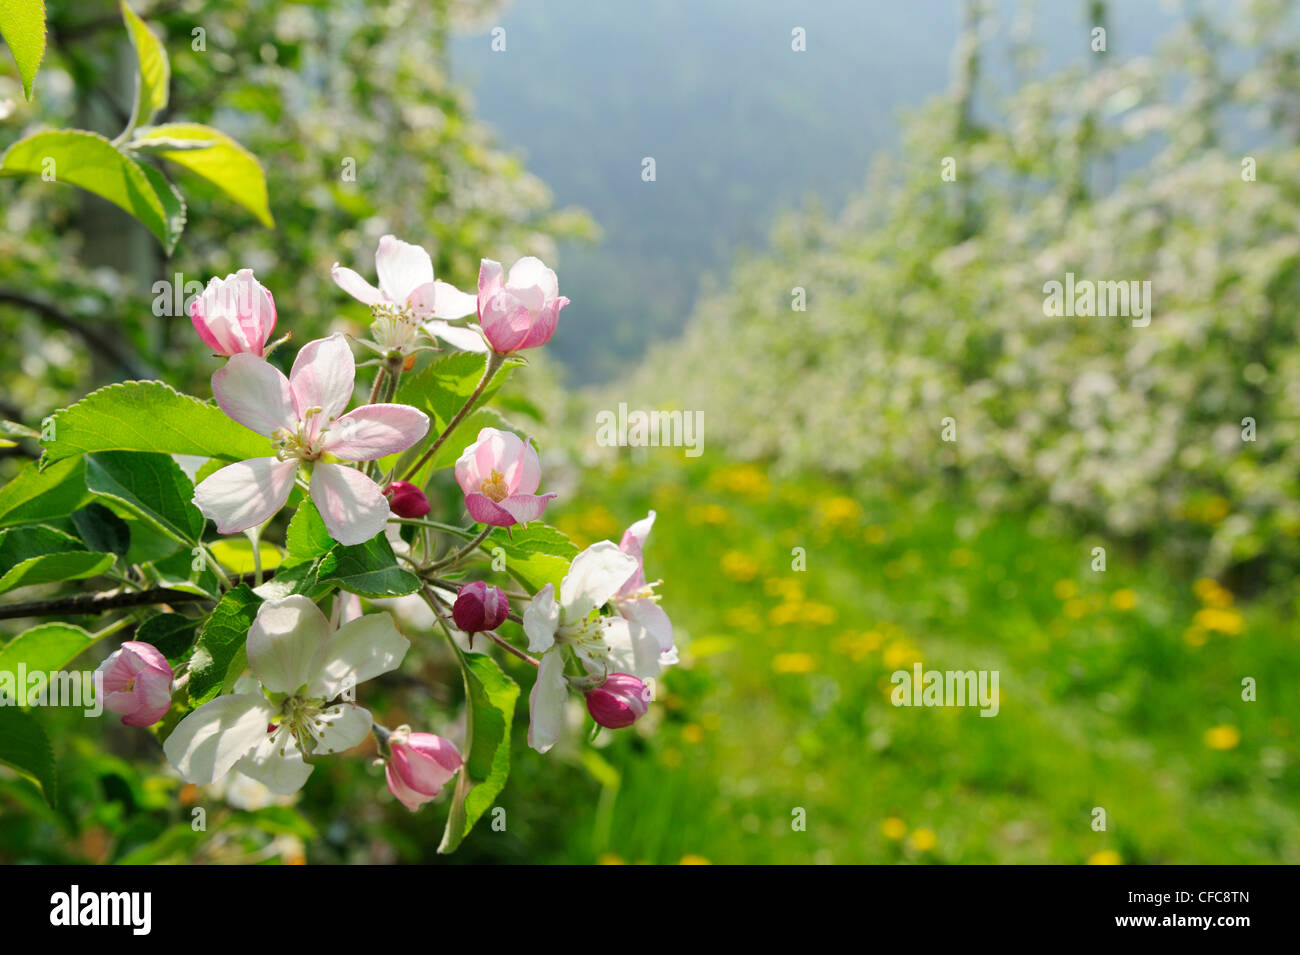 Apple trees in blossom, Partschins, Vinschgau, South Tyrol, Italy, Europe Stock Photo